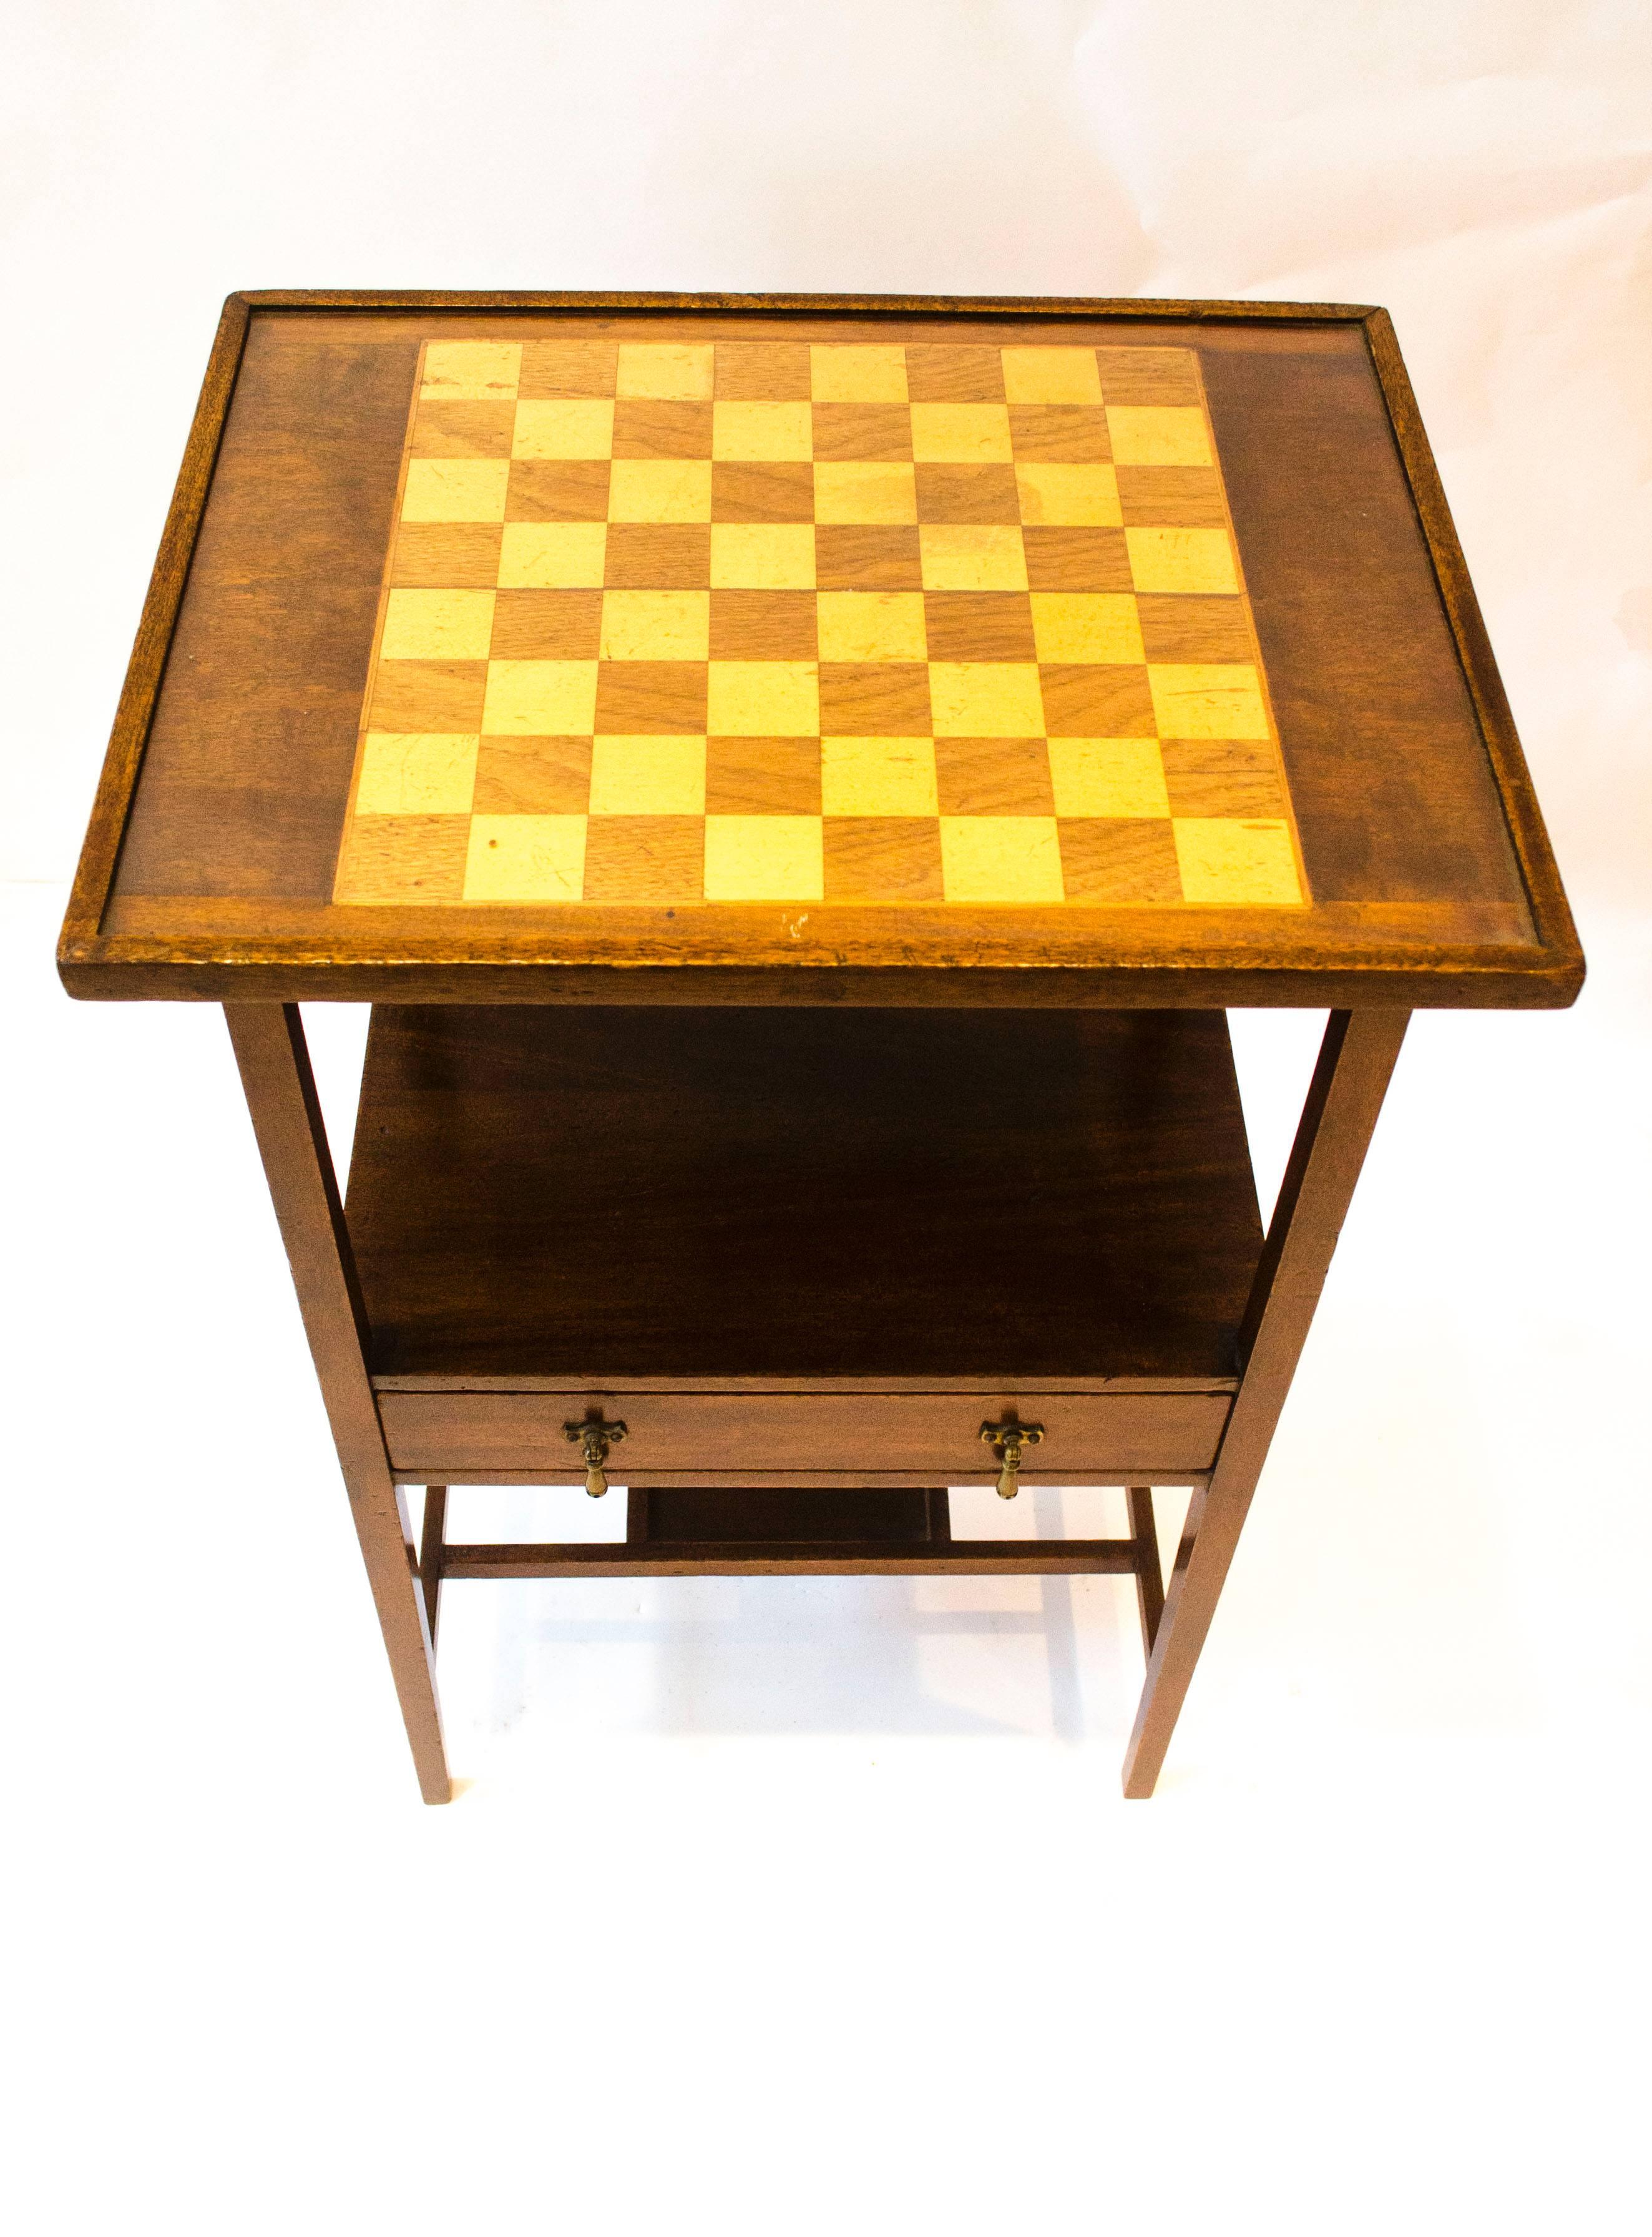 Edward William Godwin (attributed), probably made by William Watt, an early mahogany and inlaid single drawer chess table with original brass handles with dot decoration to the handle drops on square legs united by twin stretchers united by a small